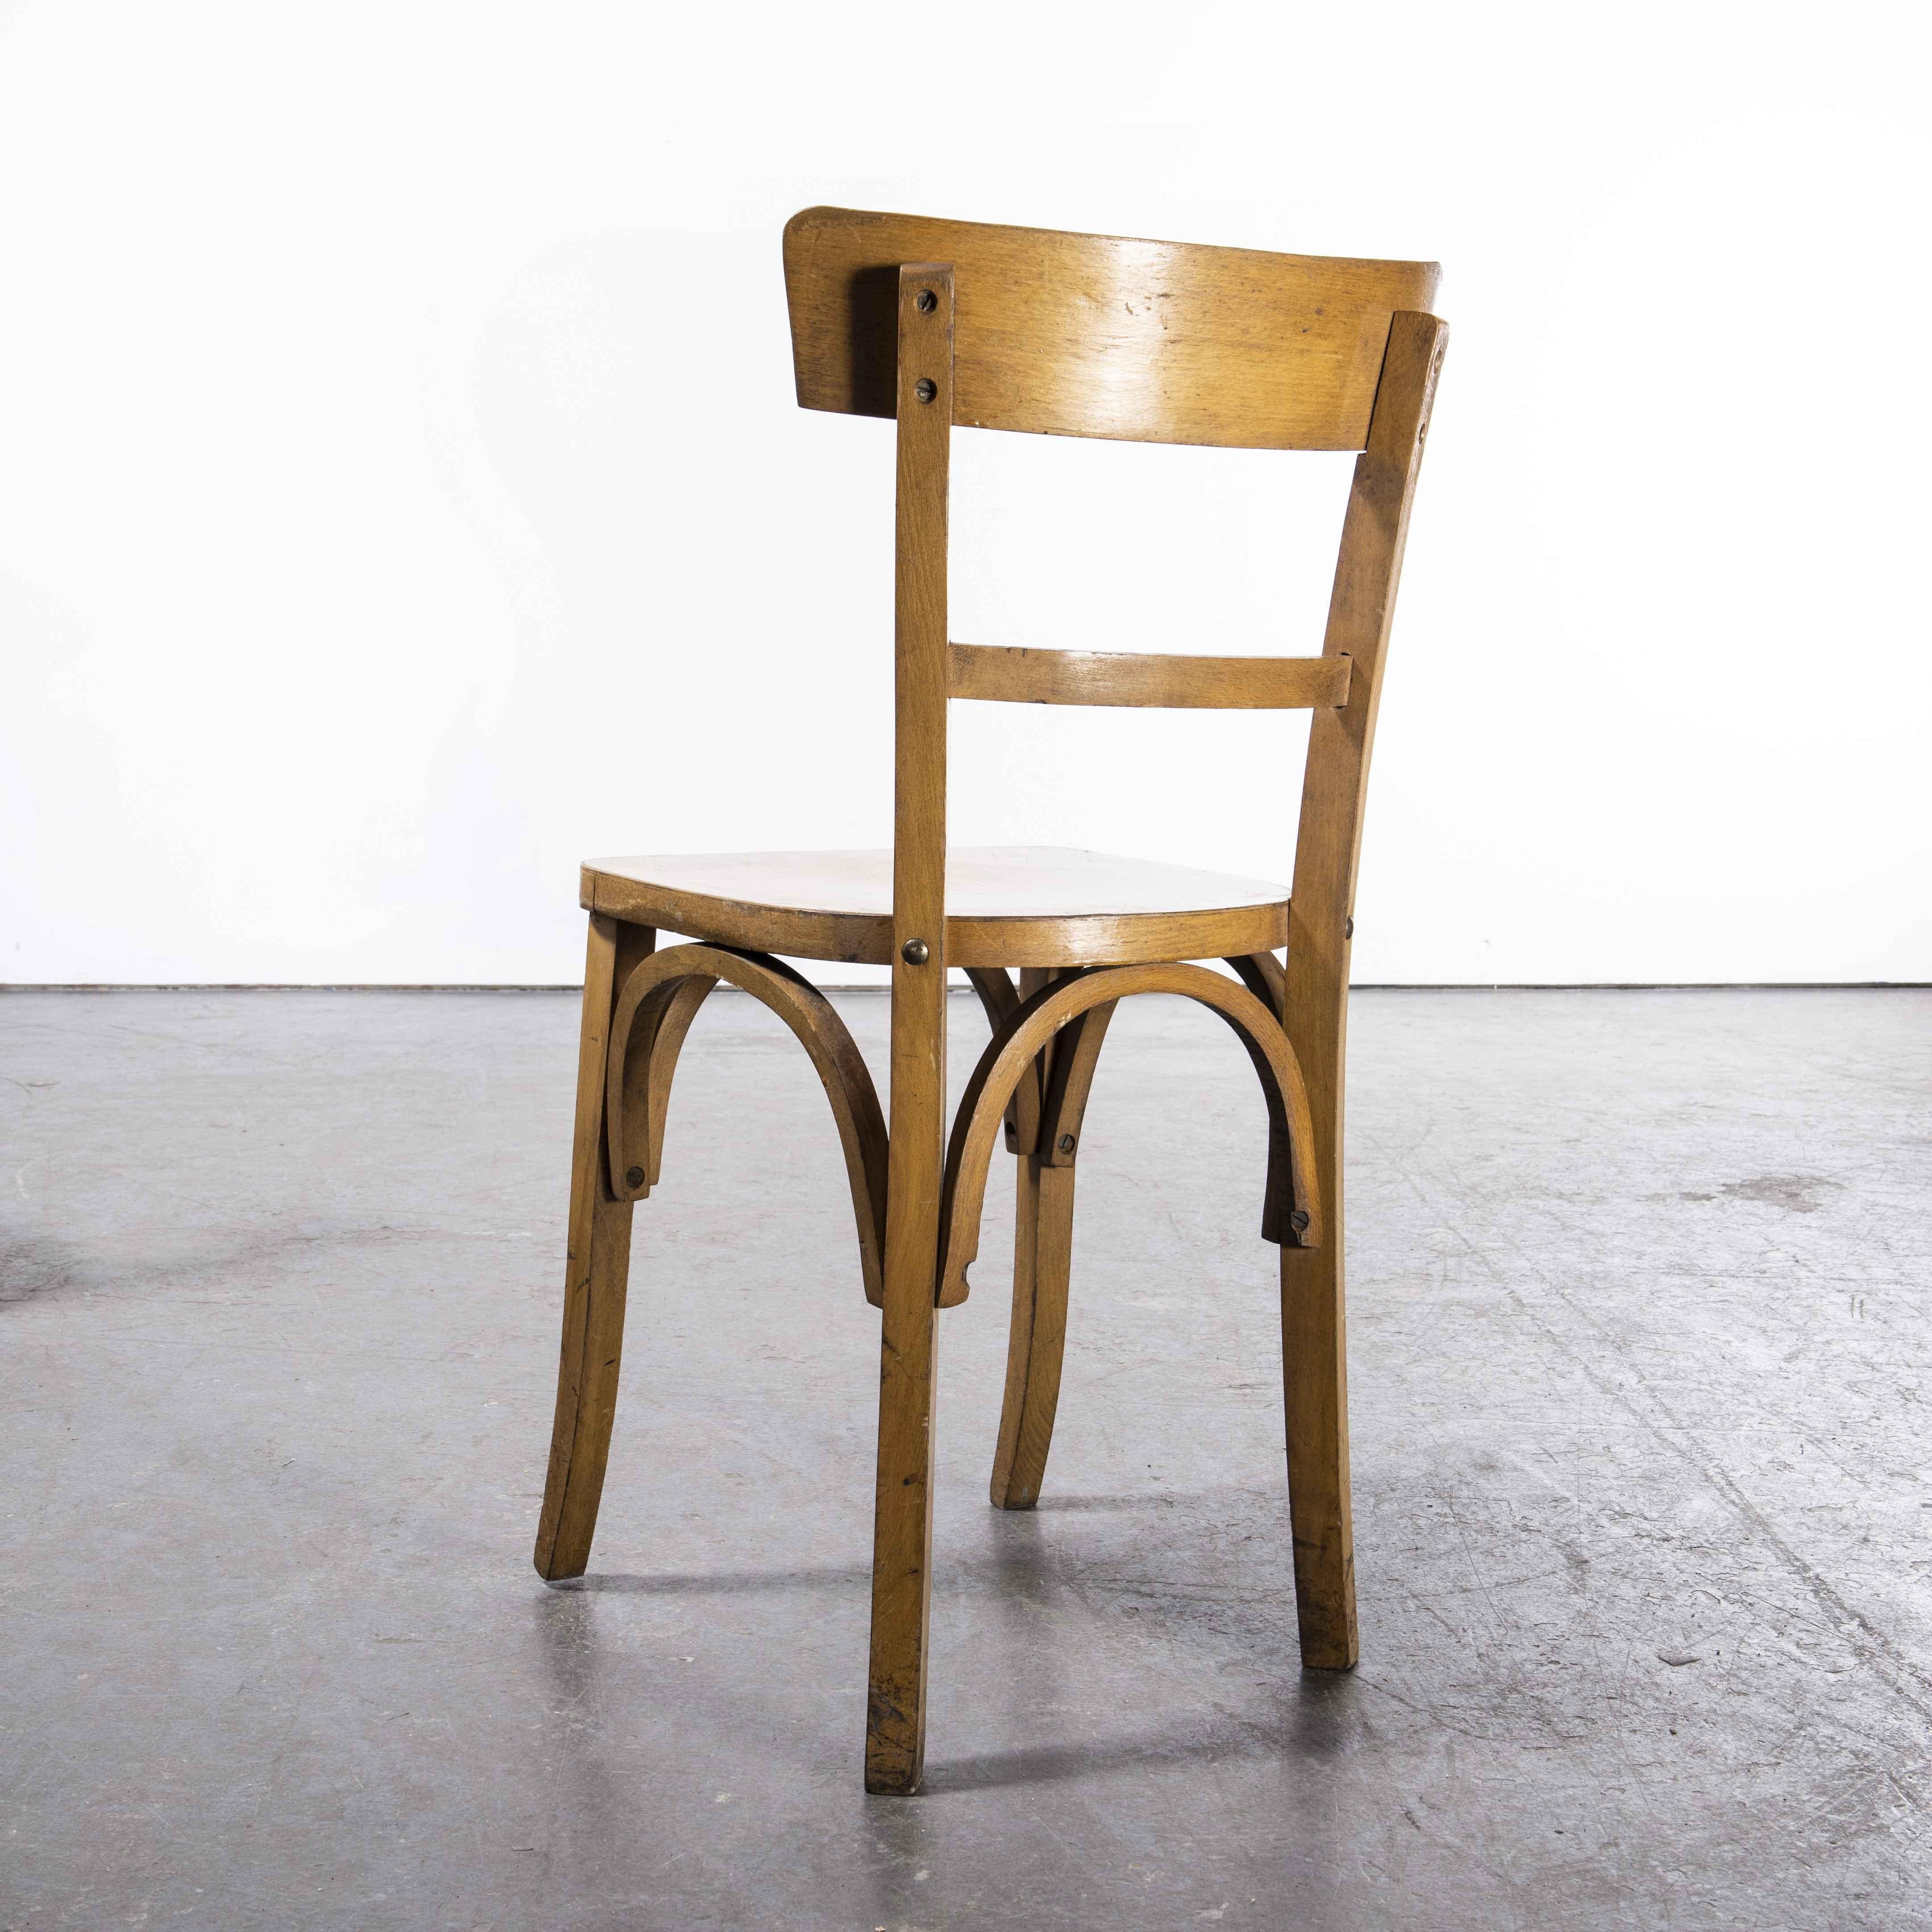 1950’s Baumann bentwood bistro dining chair – single bar back – set of six

1950’s Baumann bentwood bistro dining chair – single bar back – set of six. Classic Beech bistro chair made in France by the maker Baumann. Baumann is a slightly off the